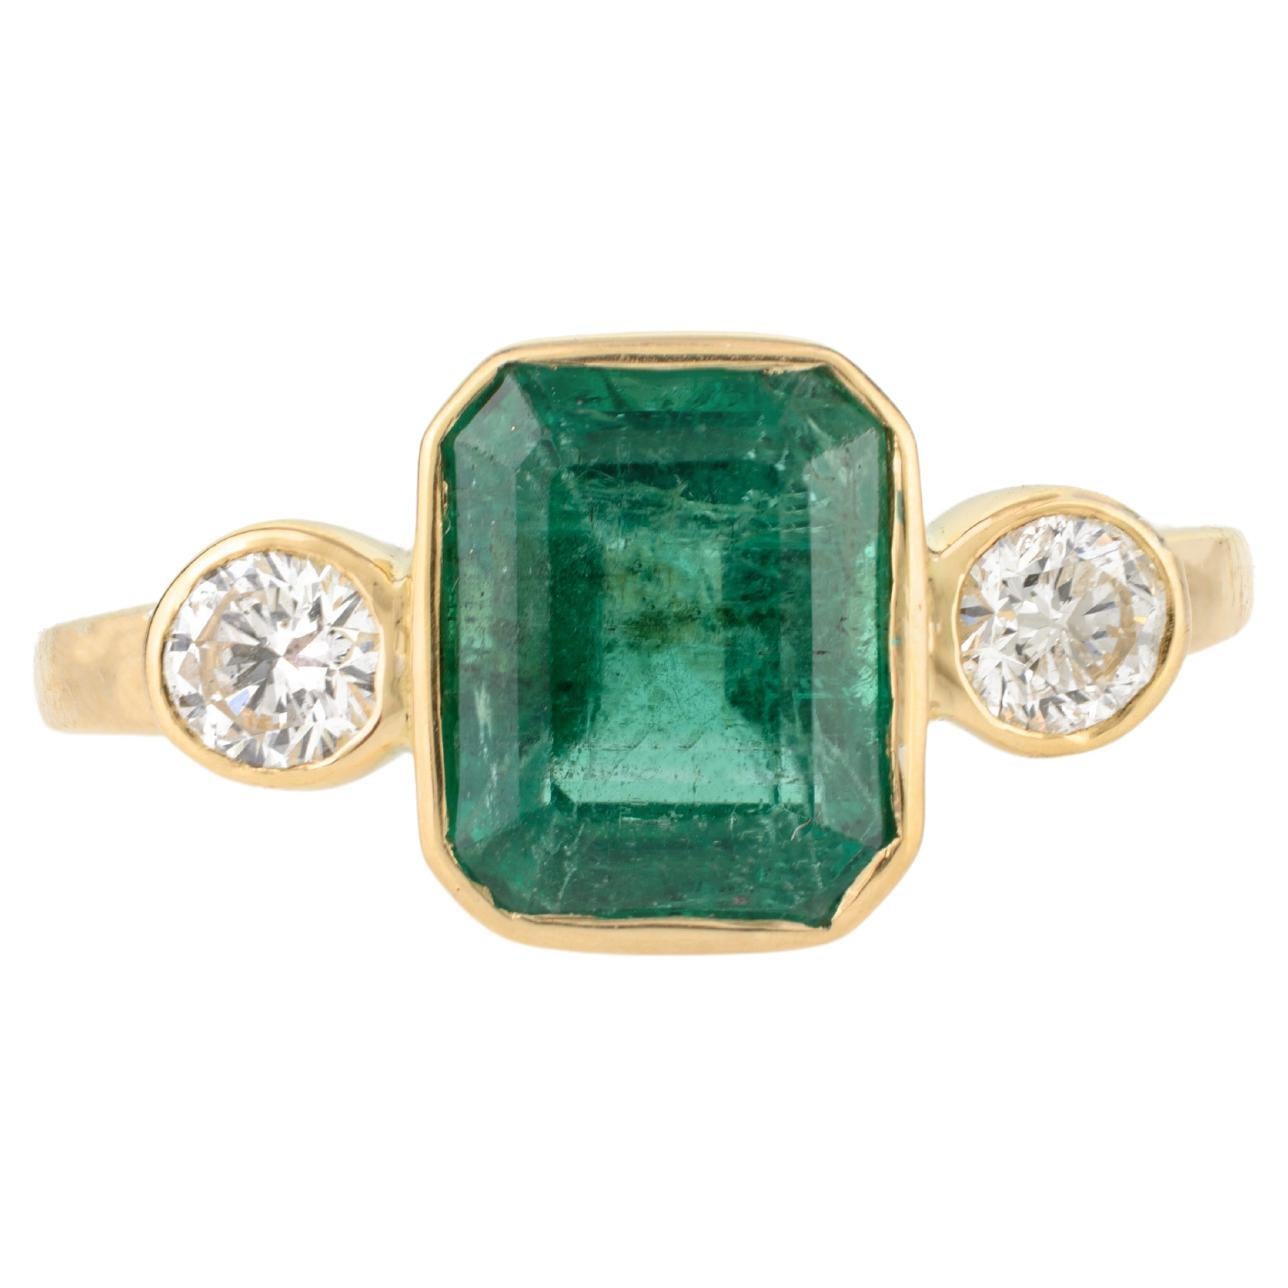 For Sale:  2.41 CTW Natural Emerald Diamond Three Stone Engagement Ring in 18k Yellow Gold